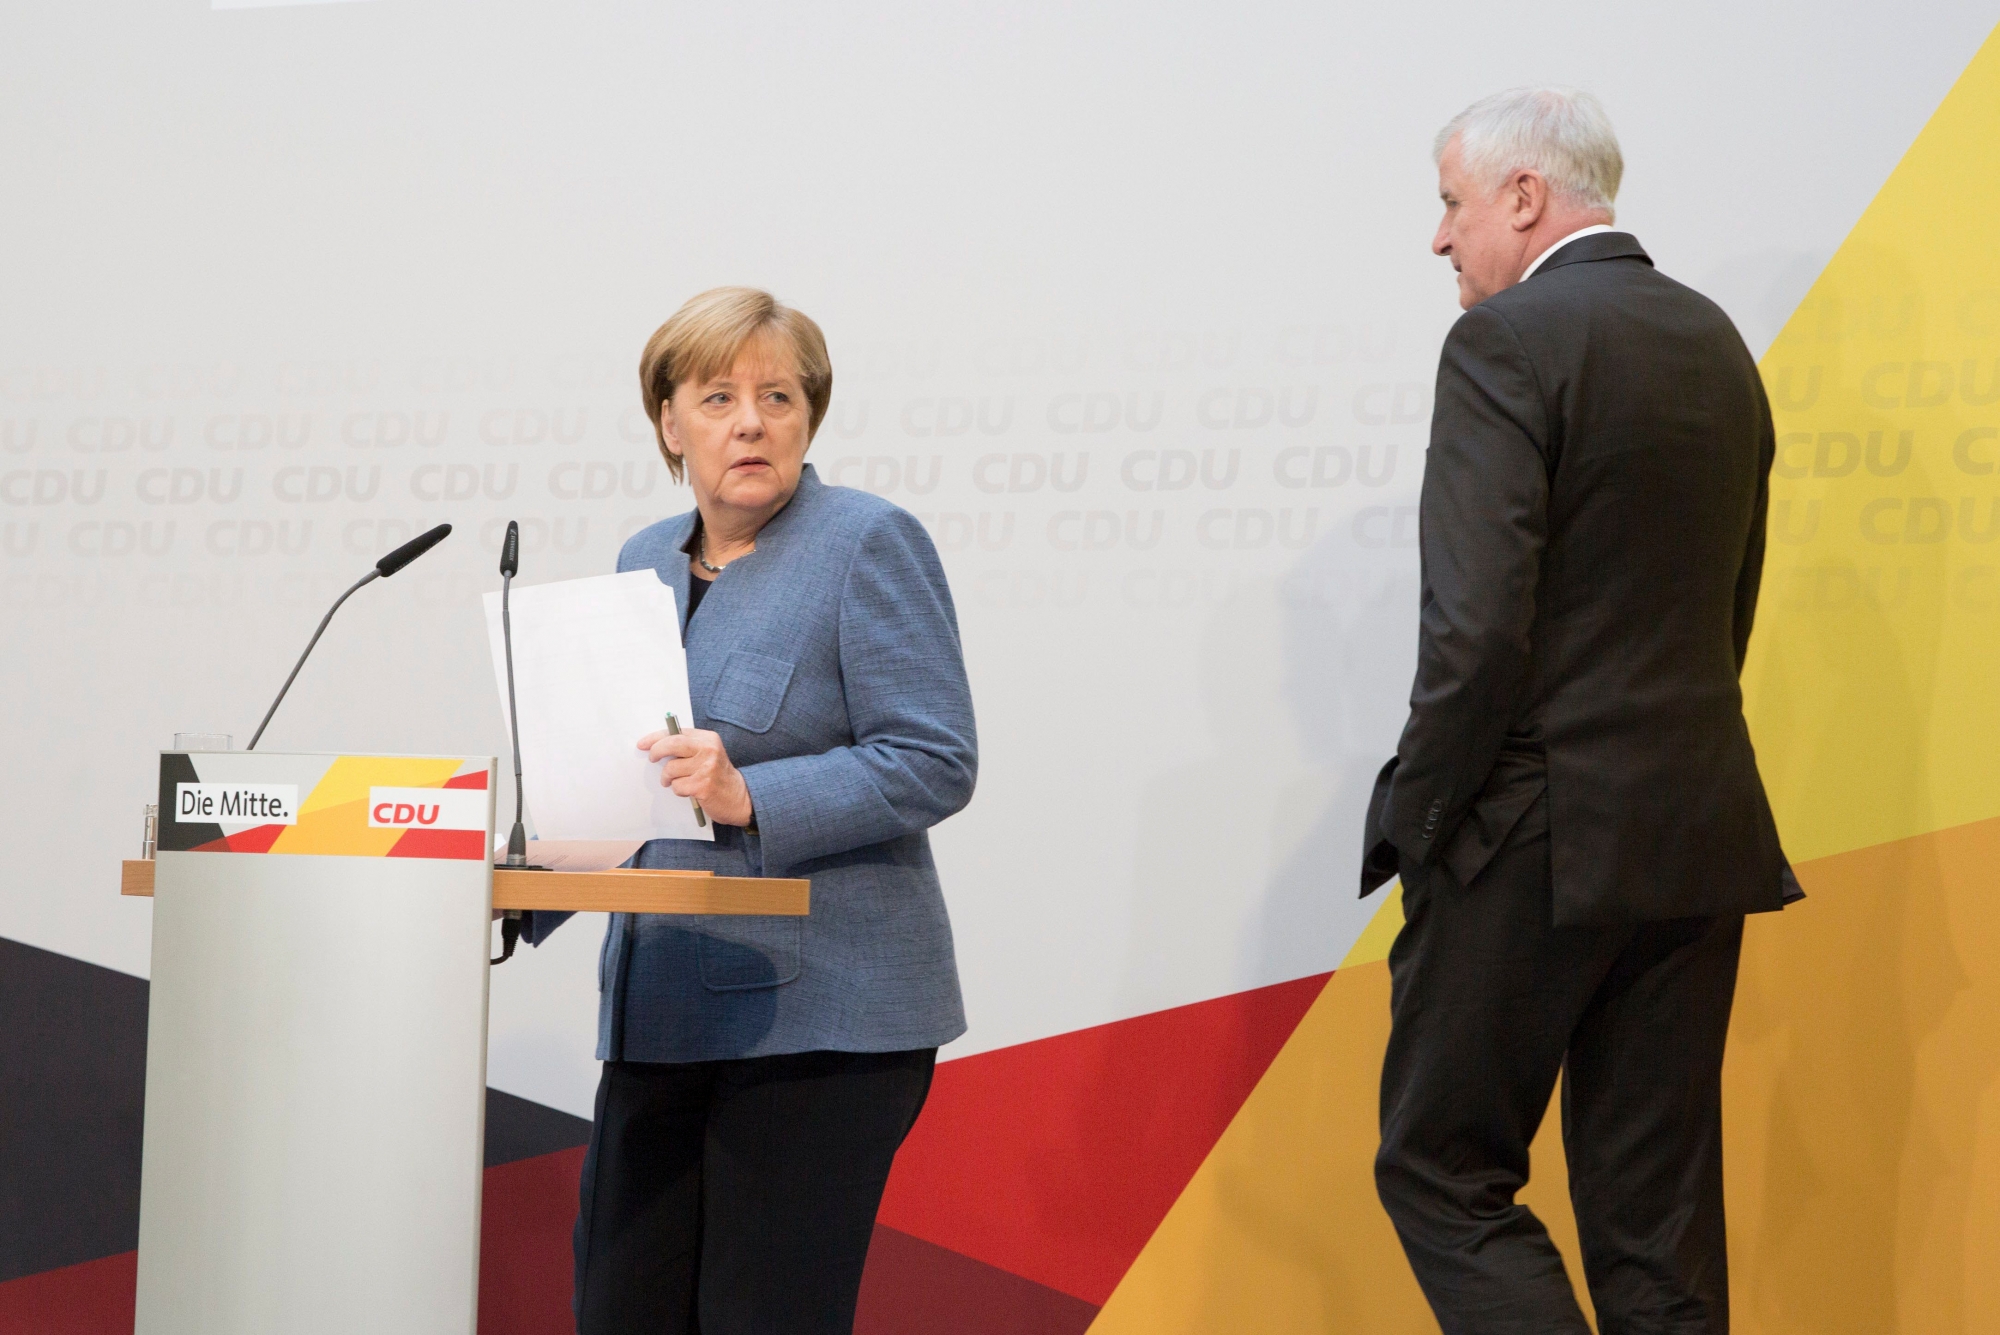 epa06254435 German Chancellor Angela Merkel of the Christian Democratic Union (CDU) during a press conference with Minister President of Bavaria Horst Seehofer (R) of the The Christian Social Union in Bavaria (CSU) party during a press conference at the Konrad-Adenauer-Haus in Berlin, Germany, 09 October 2017. German Chancellor Merkel said on the press conference that she invites the Free Democratic Party (FDP) and The Greens to start exploratory talks on coalition negotiations building a new federal Government in Germany on 18 October 2017.  EPA/OMER MESSINGER GERMANY ELECTIONS 2017